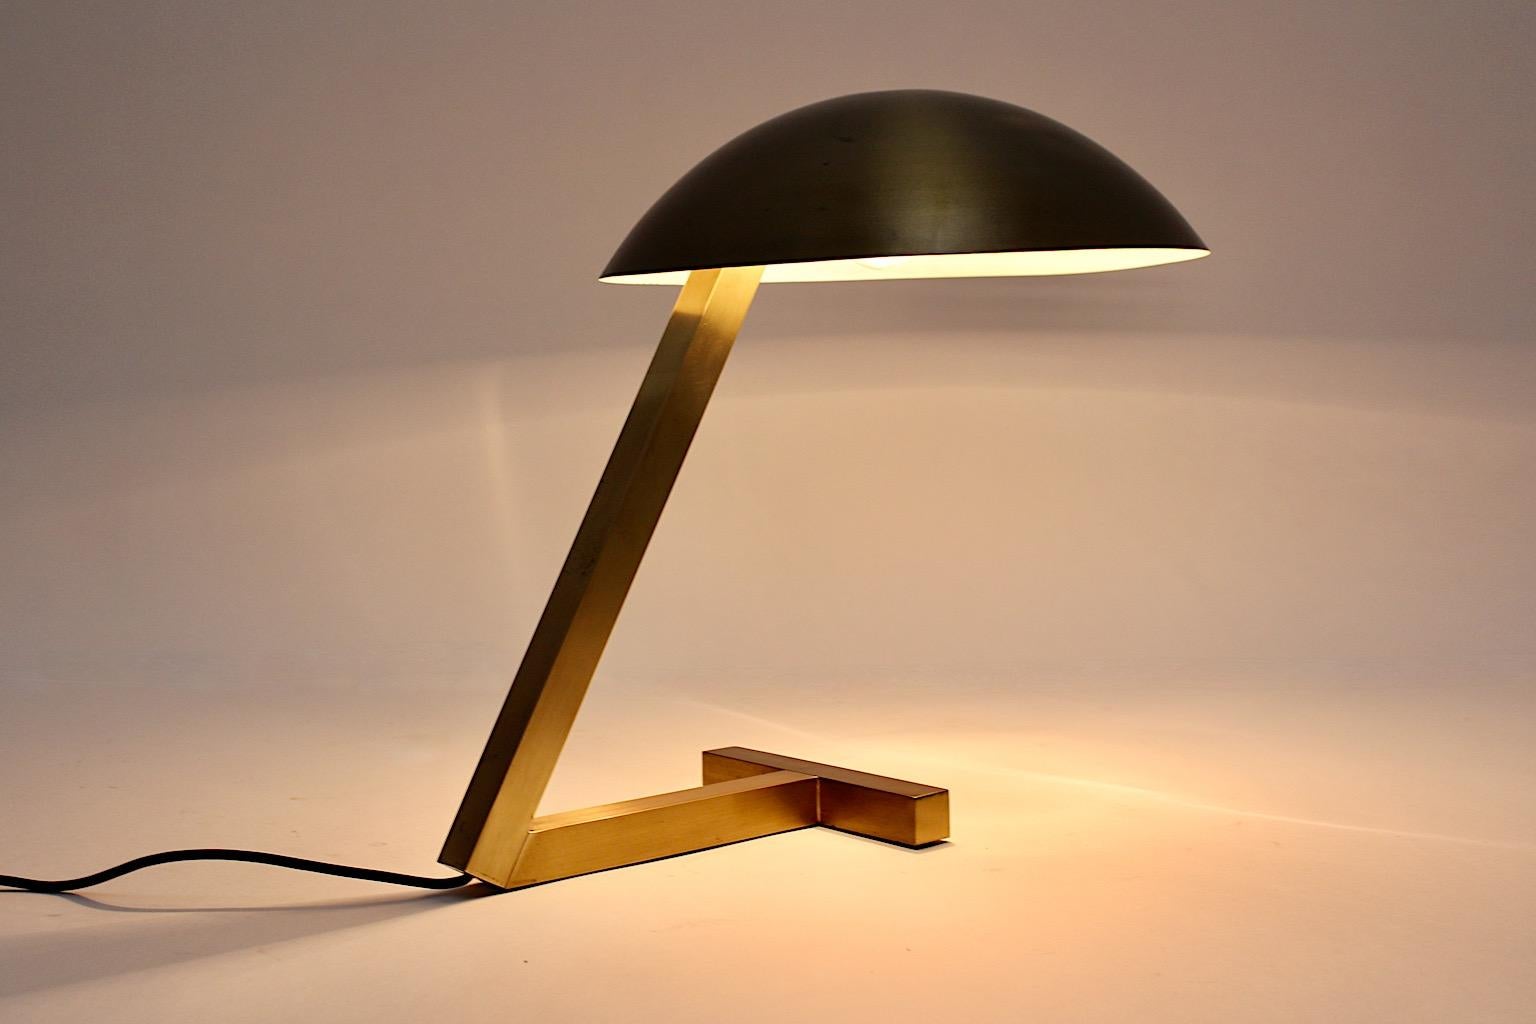 Space Age vintage dome table lamp or desk lamp from brass 1960s Italy.
An amazing table lamp from brass with dome shade and geometric base worked in a beautiful golden color.
The geometrical shape from the base stands in contrast to the round